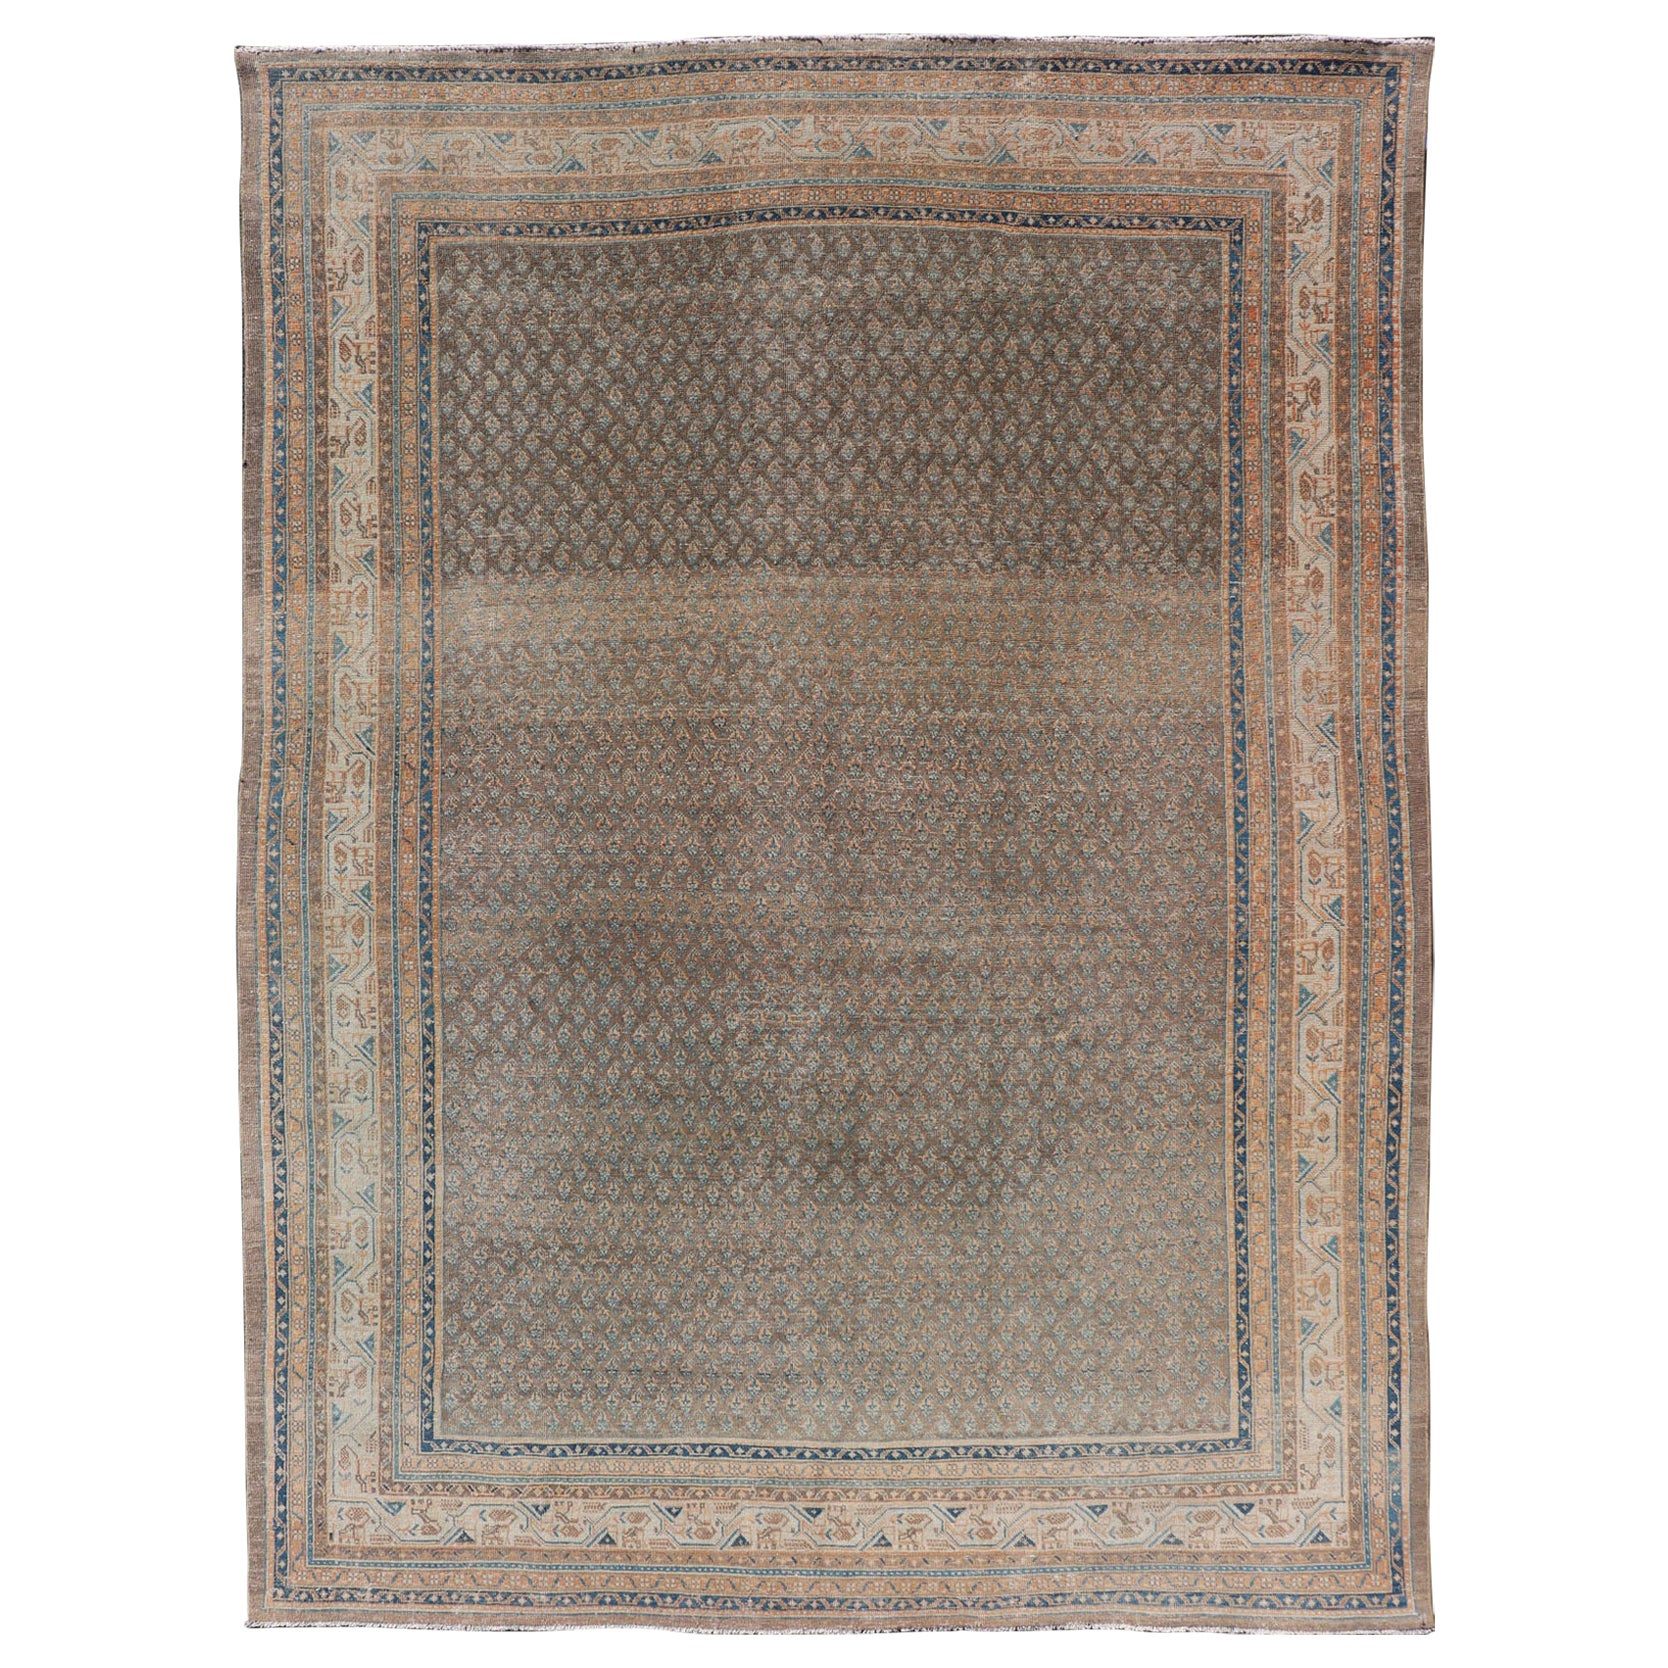 Persian Tabriz Rug with All-Over Saraband Design in Brown and Blue